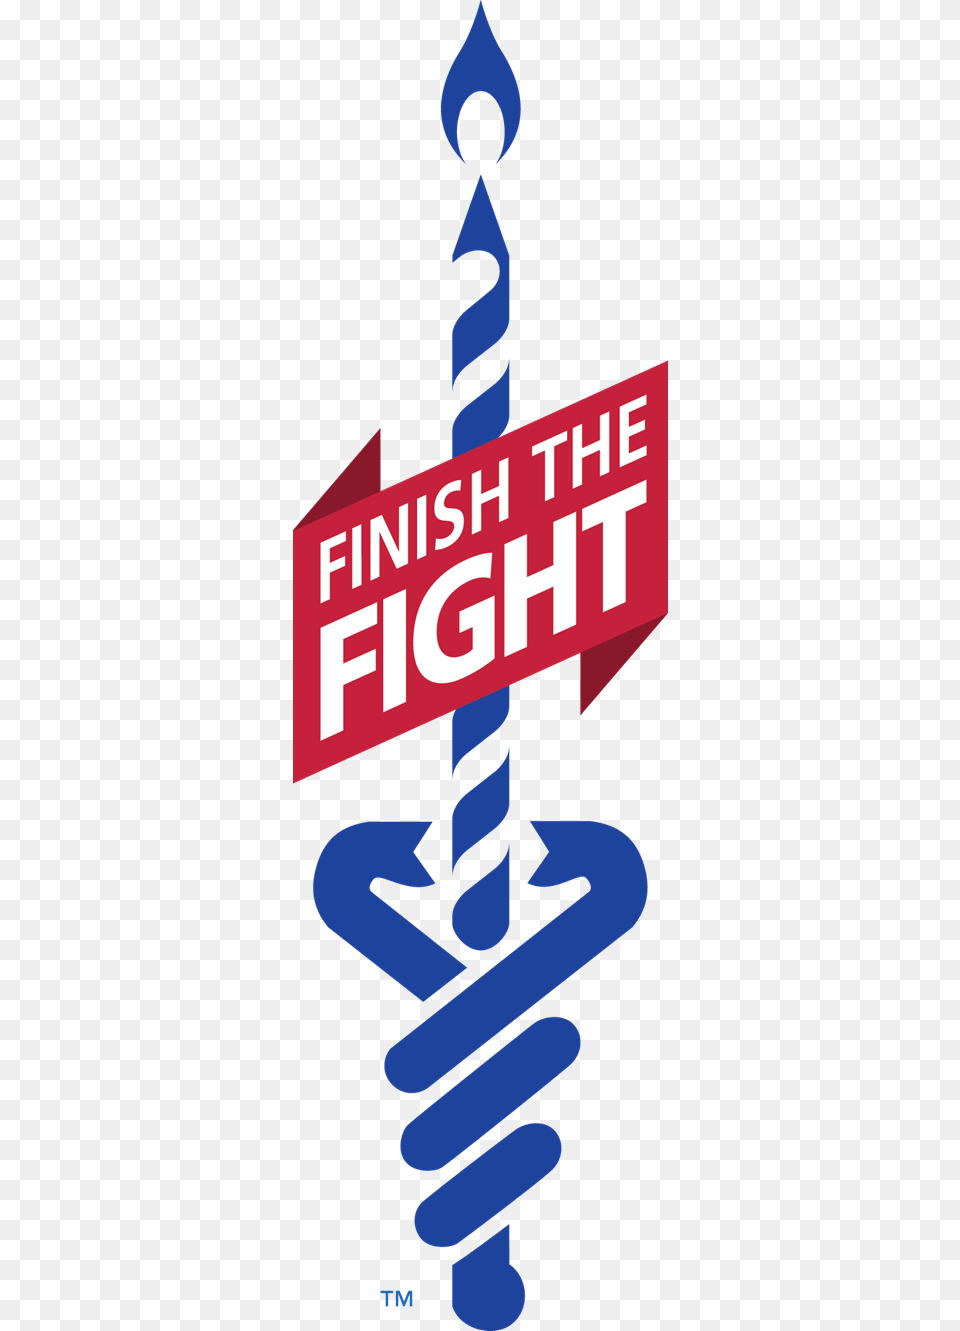 Relay For Life Finish The Fight Logo Relay For Life Finish The Fight, Spiral, Coil Free Png Download